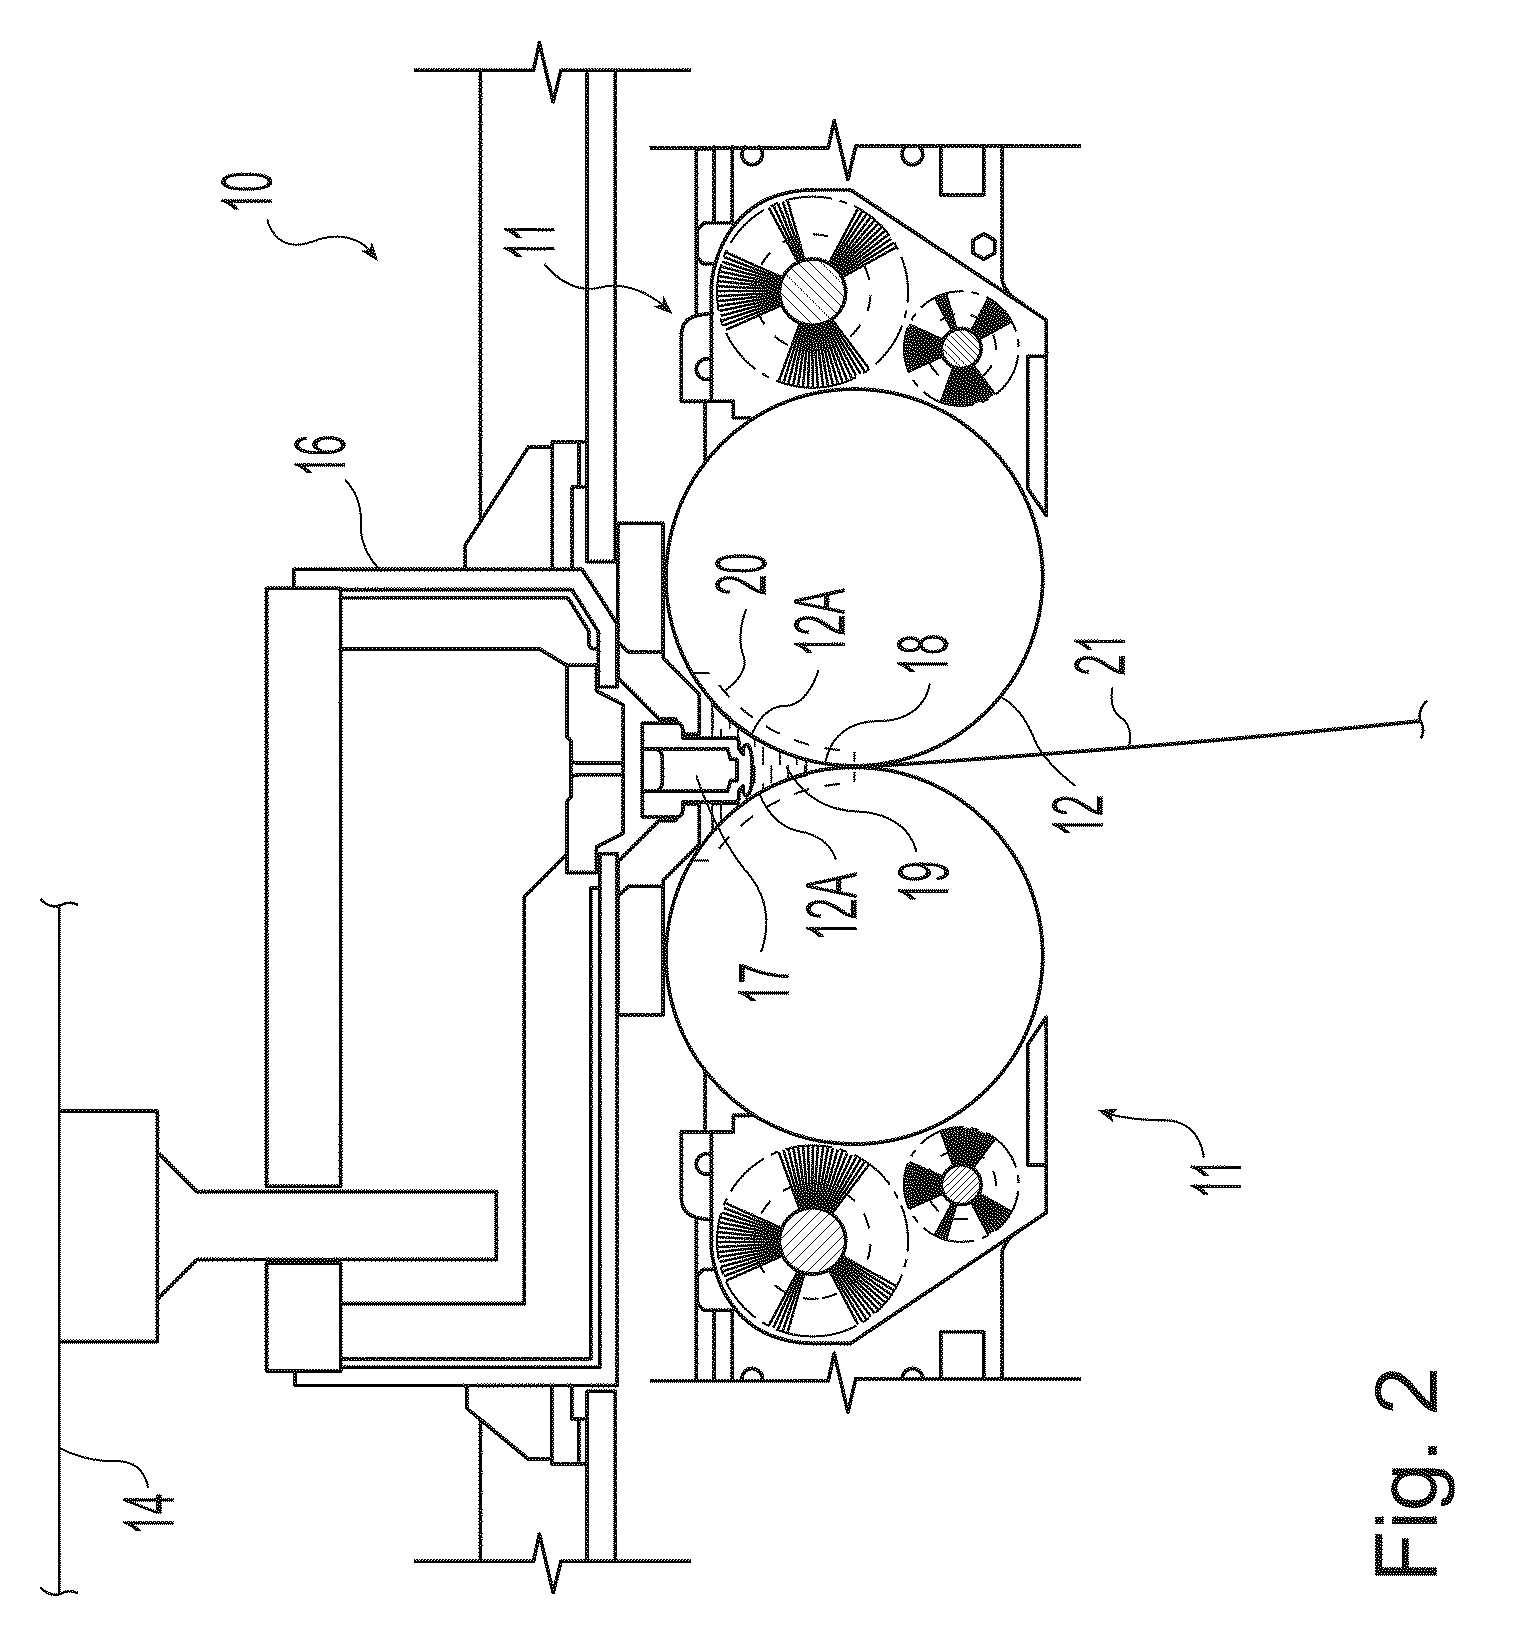 Strip casting apparatus with improved side dam